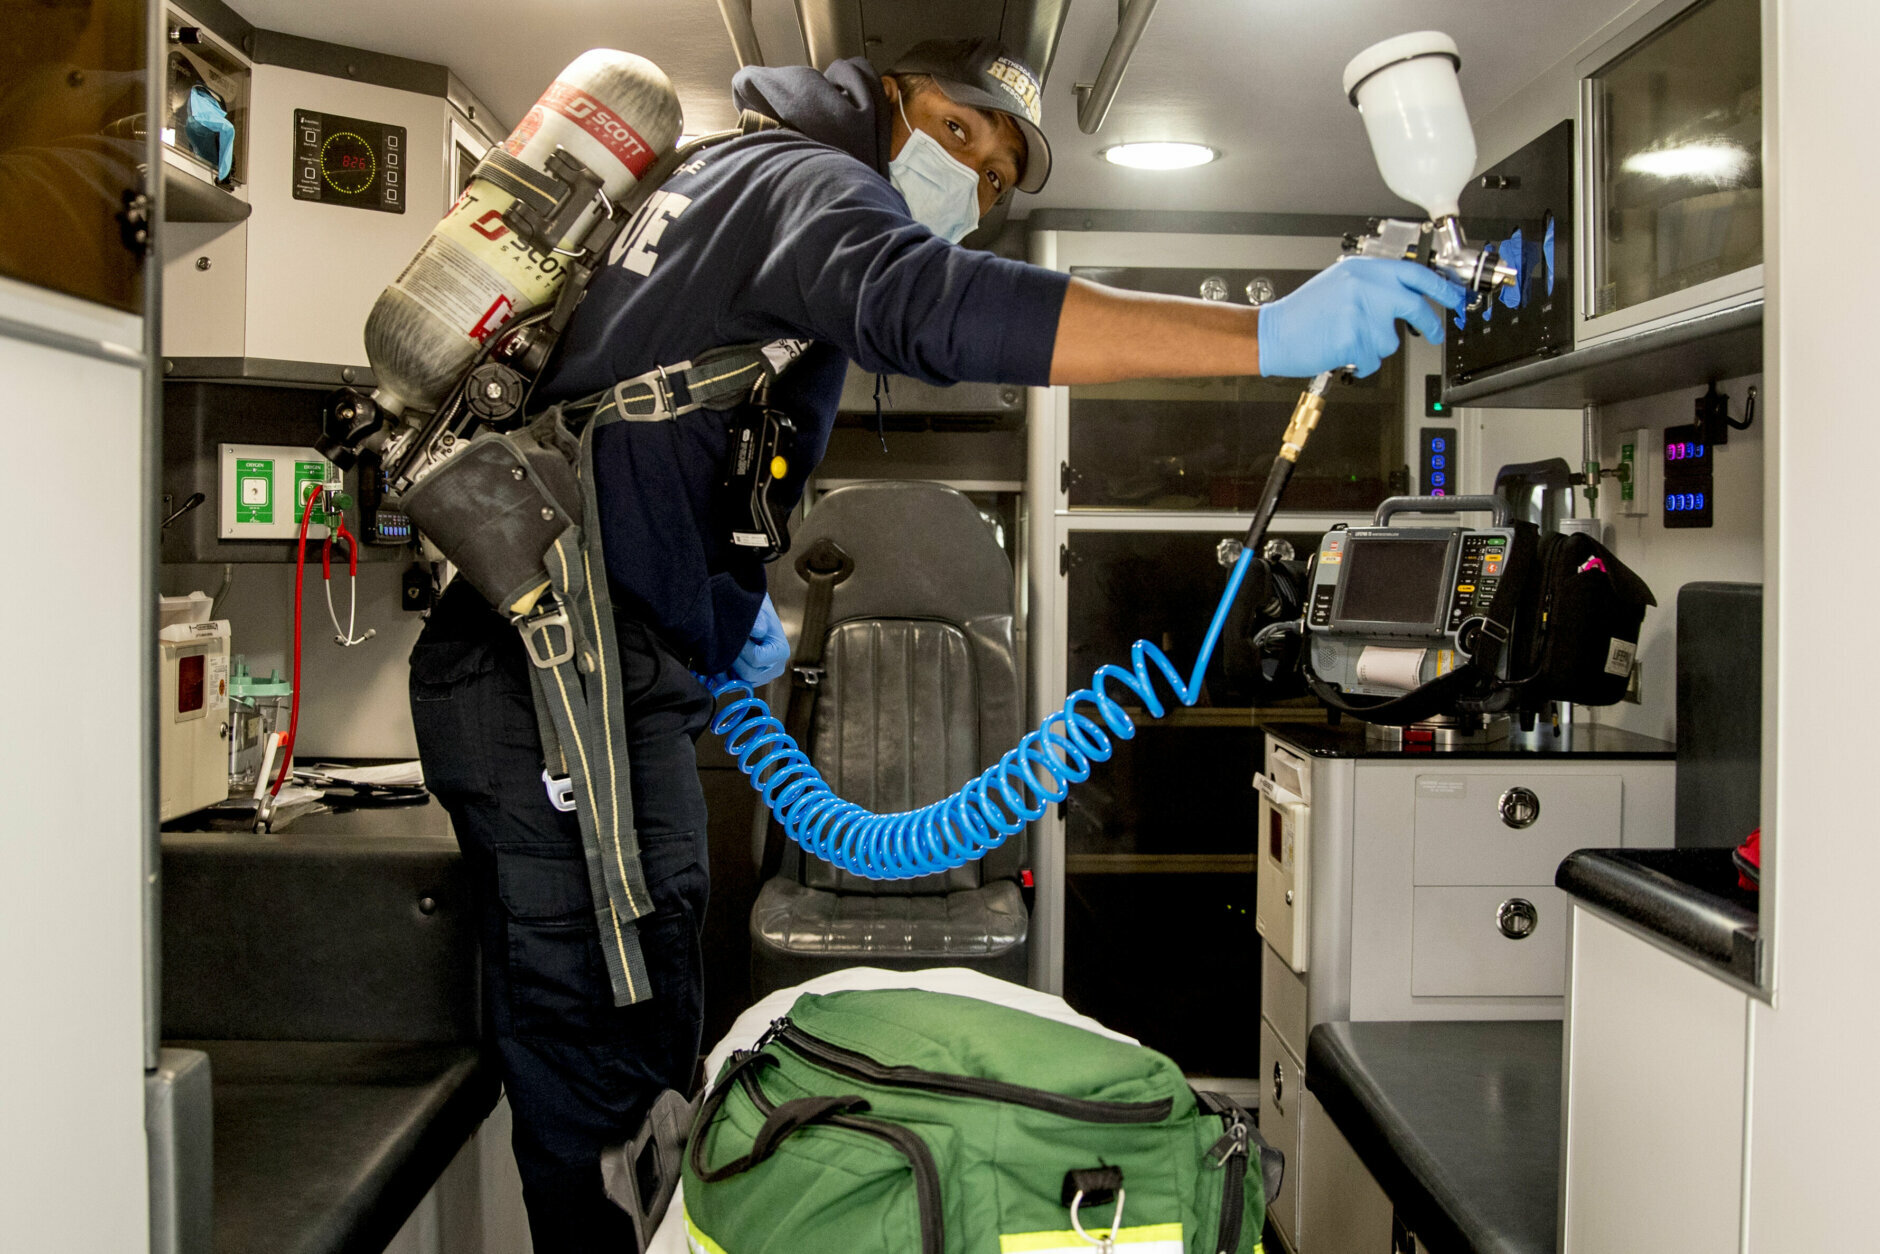 Volunteer EMT Ronald Felix, a full time police officer for Montgomery County, Md., sanitizes an ambulance at Bethesda-Chevy Chase Rescue Squad, Saturday, April 4, 2020, in Bethesda, a suburb of Washington. (AP Photo/Andrew Harnik)